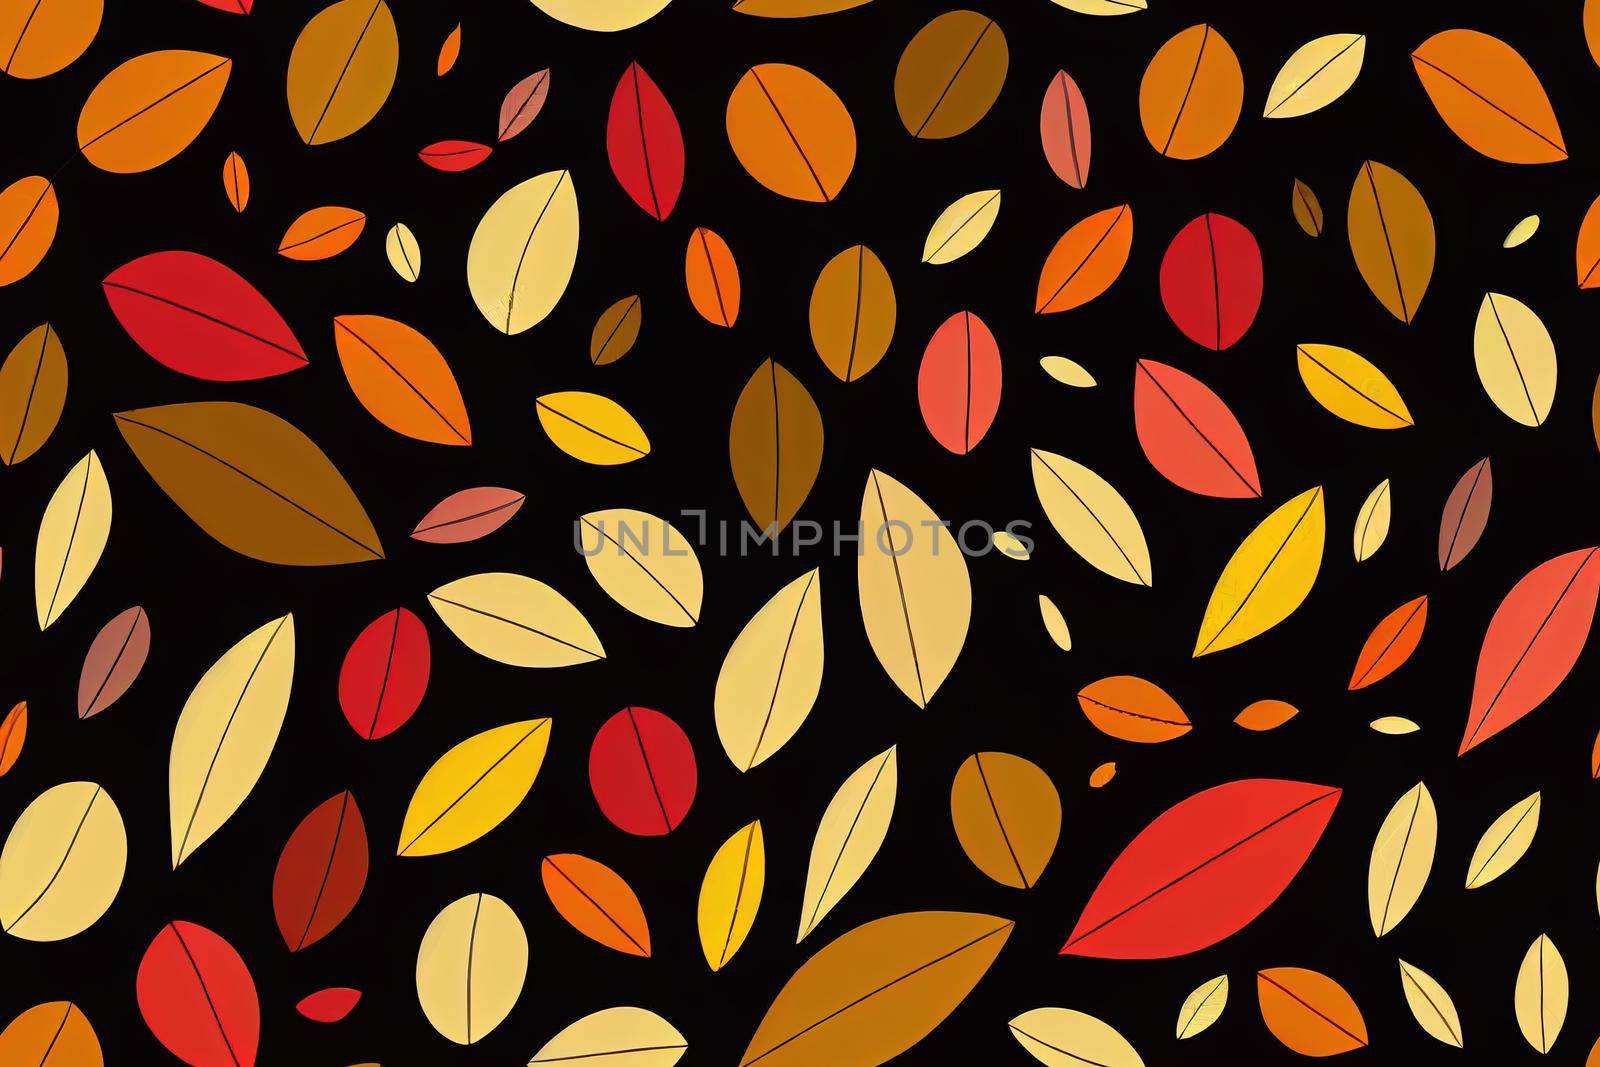 Seamless pattern minimalistic with abstract autumn leaves composition, leopard skin spots, shapes in trendy collage style Illustration on a striped background , anime style